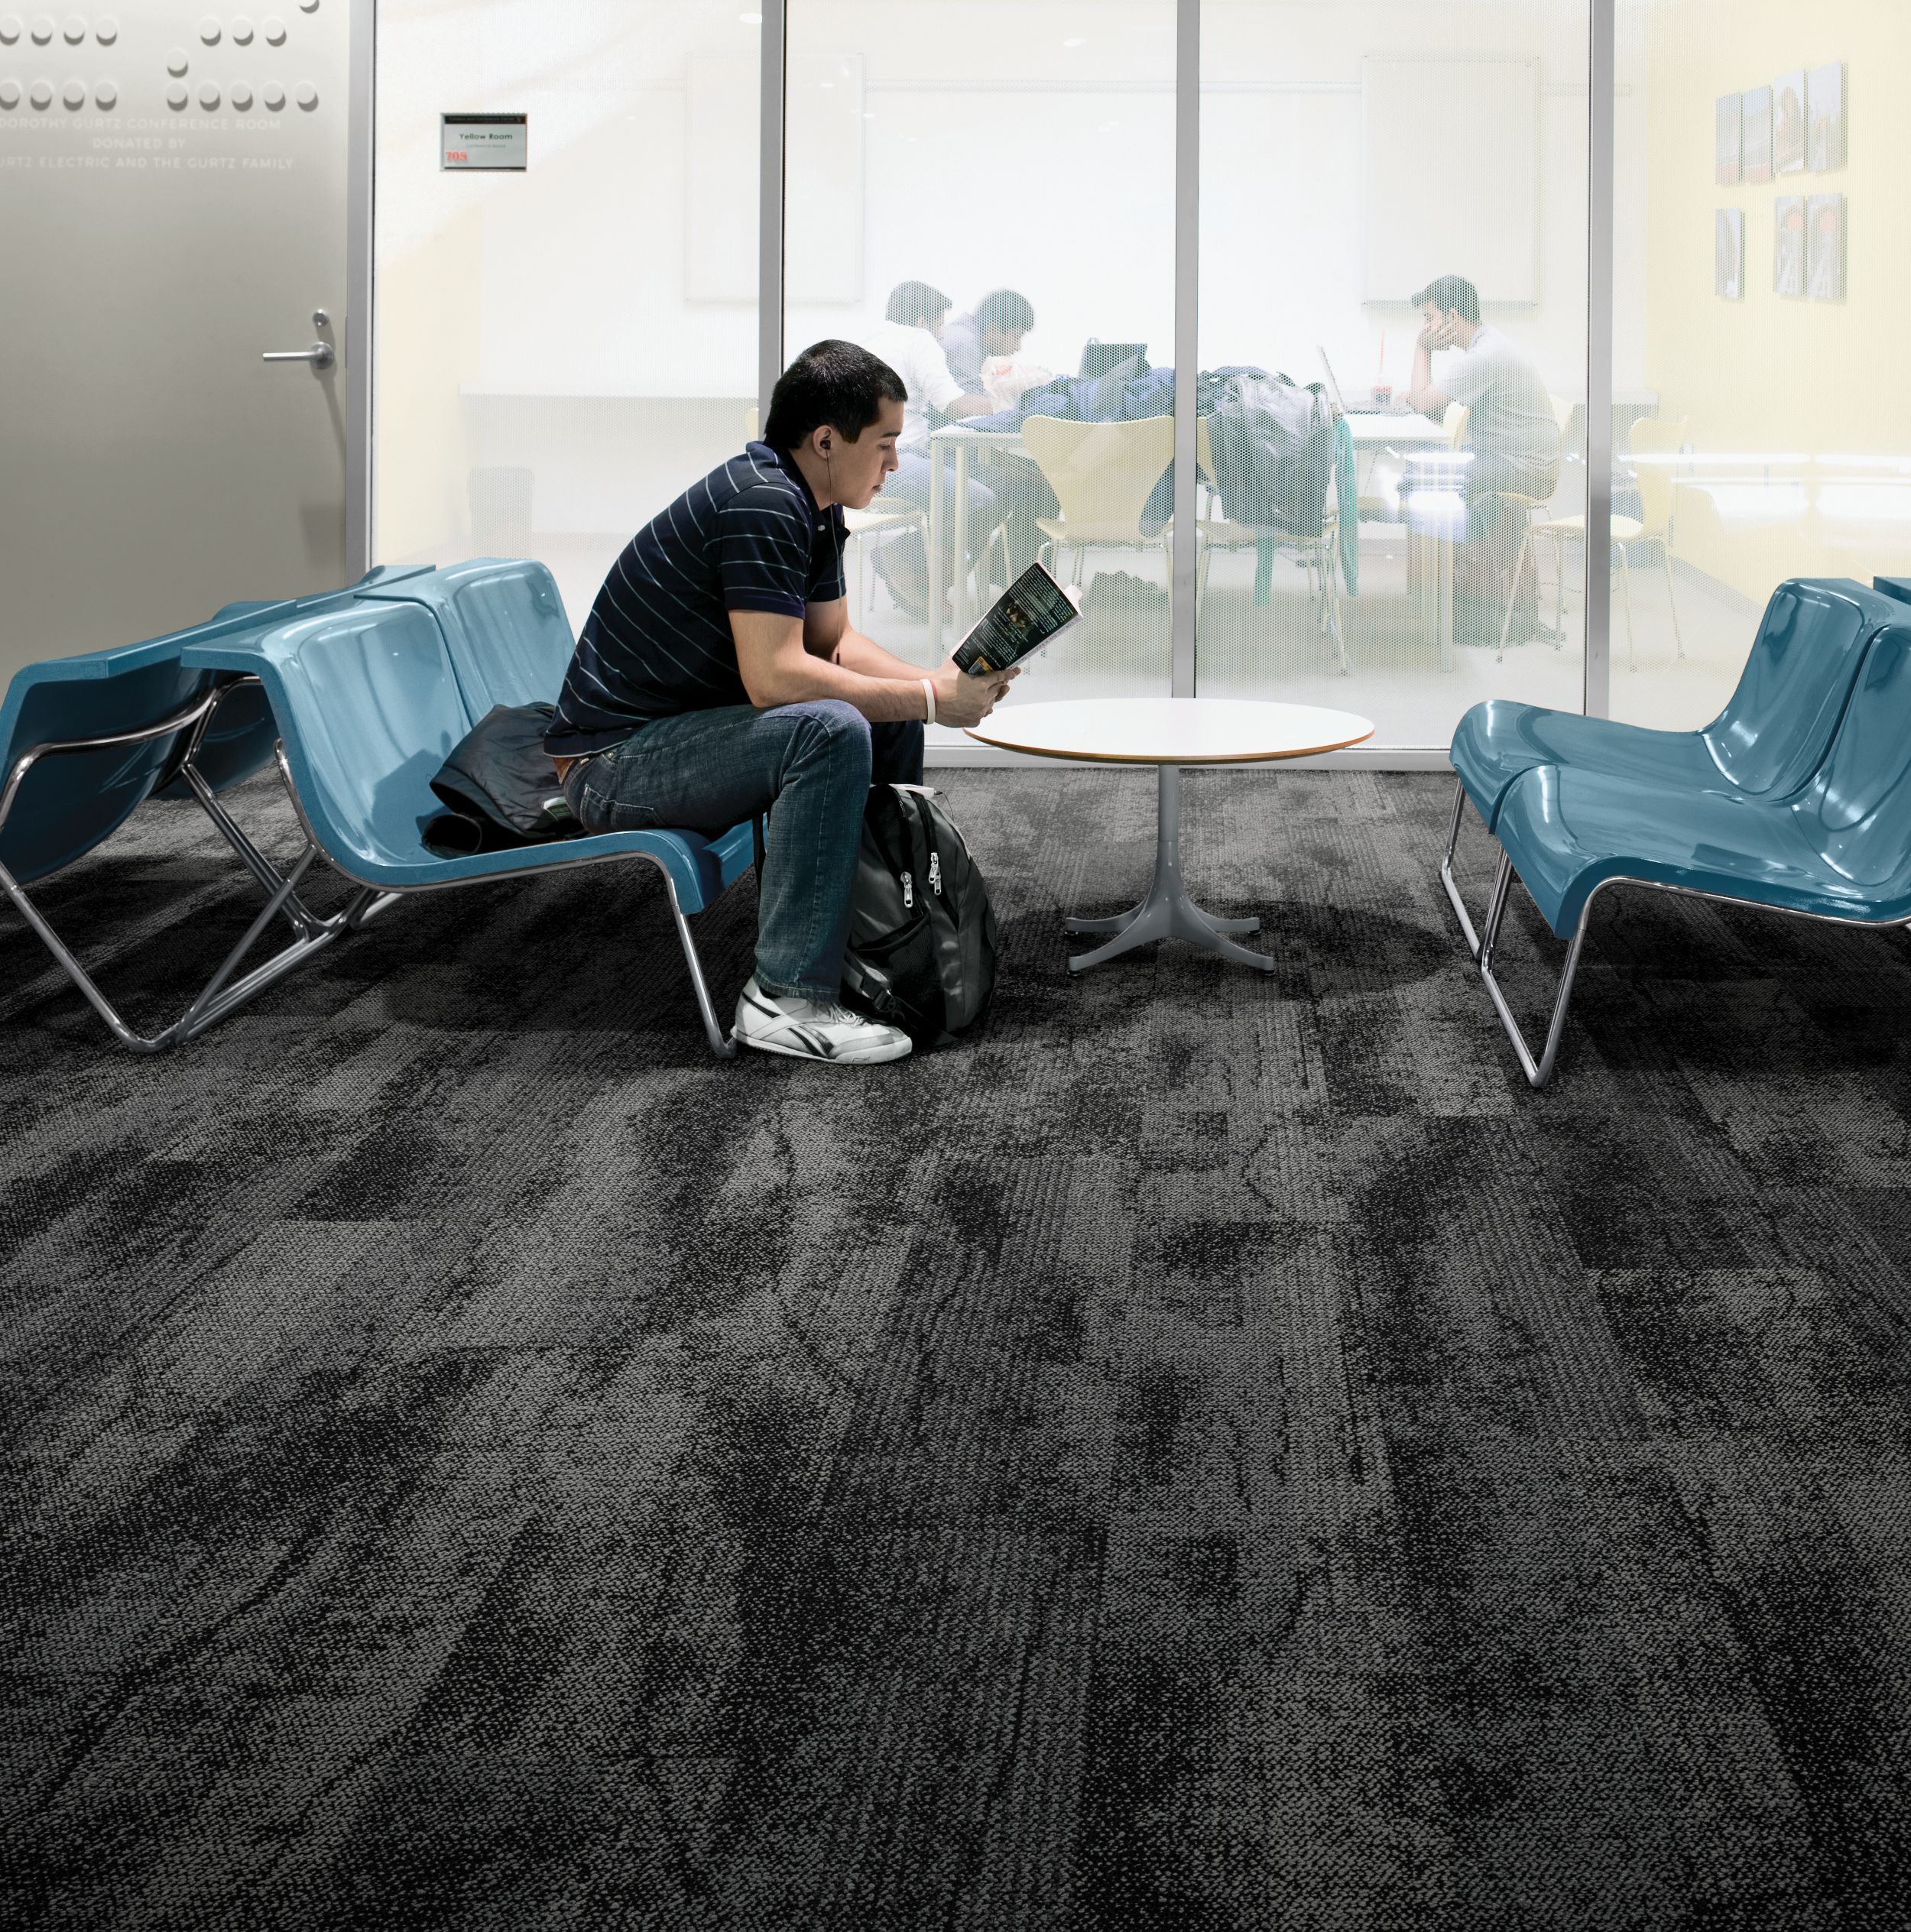 Interface Neighborhood Smooth plank carpet tile in public education space with man reading a book on blue chair imagen número 6